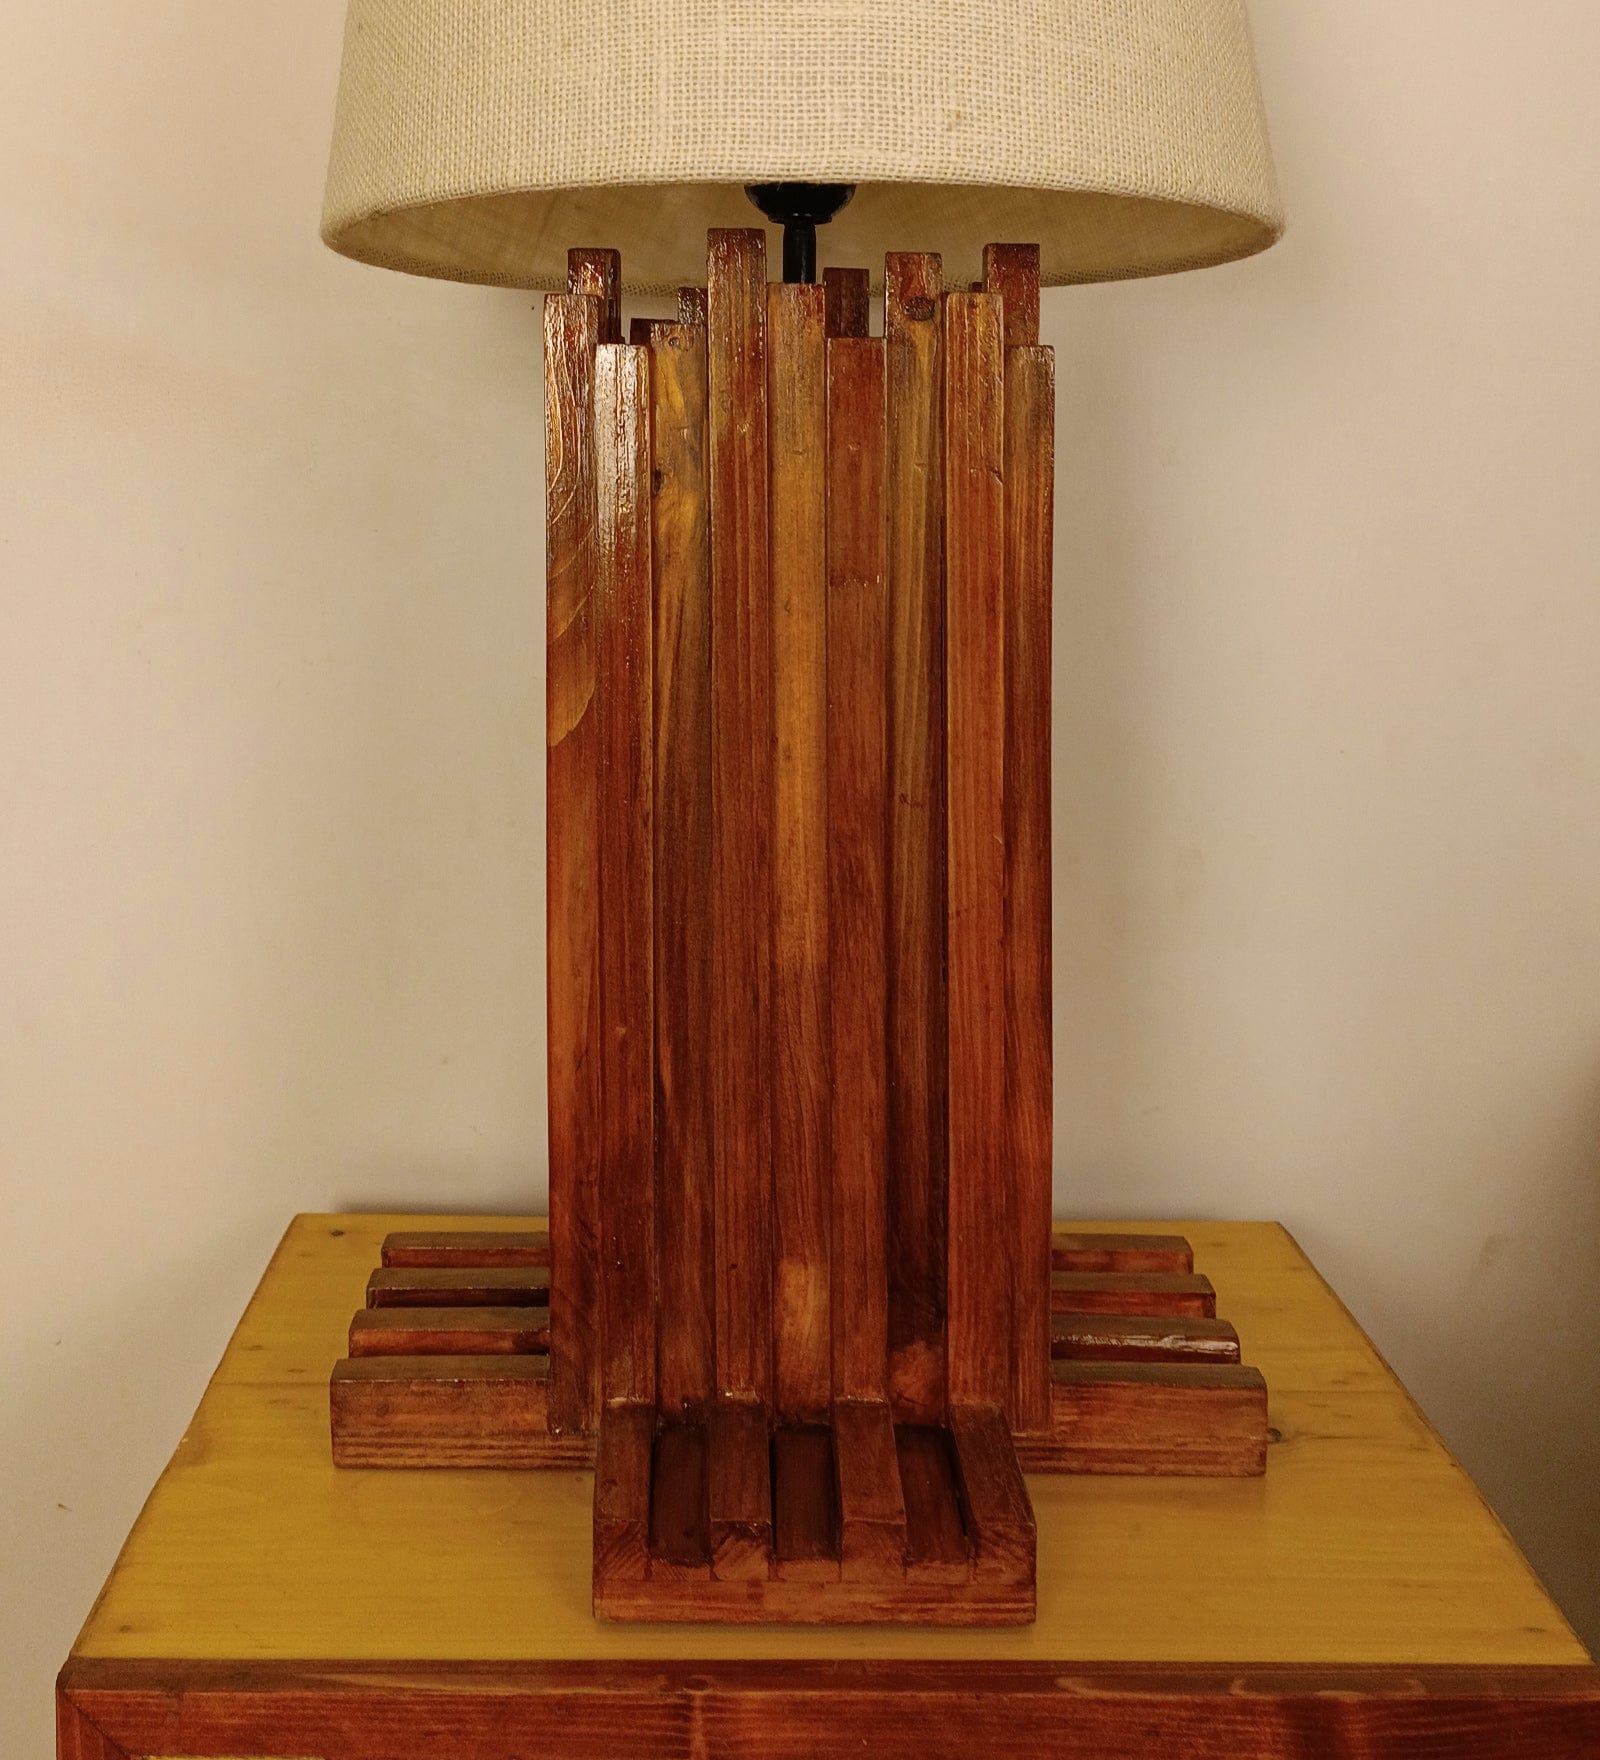 Palisade Brown Wooden Table Lamp with White Fabric Lampshade (BULB NOT INCLUDED)